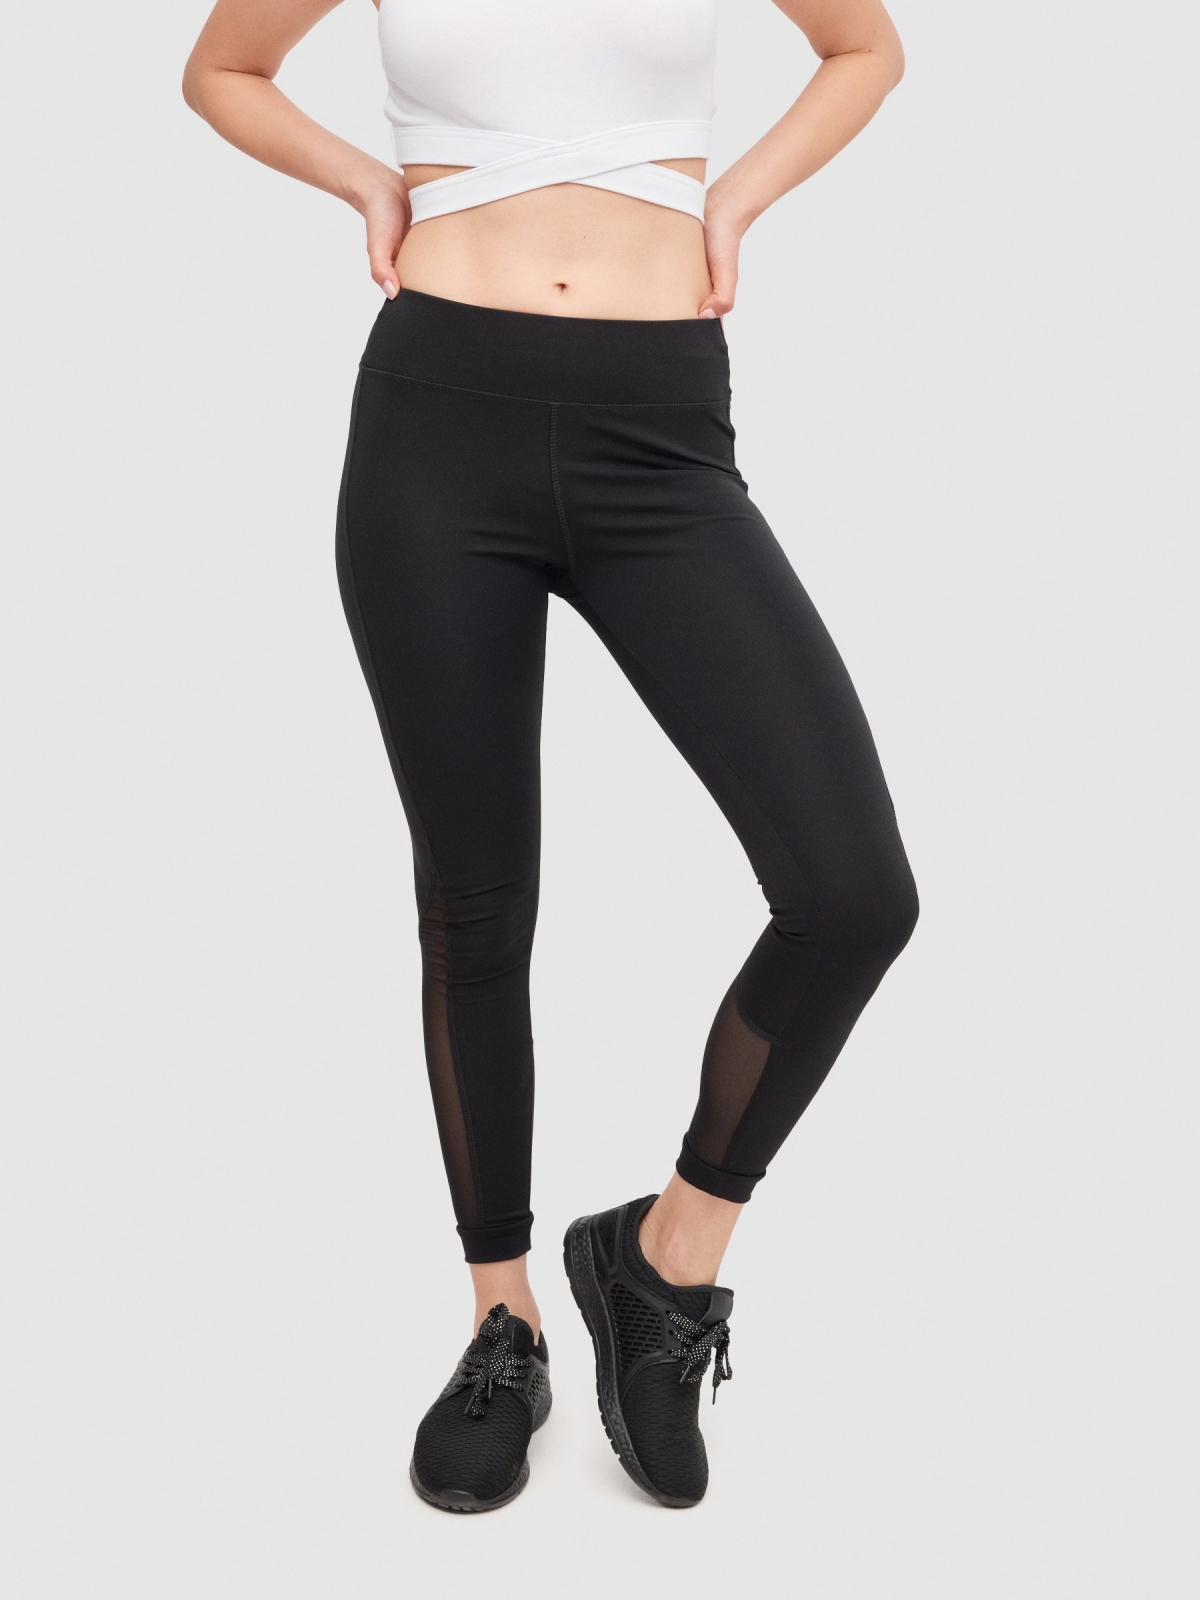 Leggings with mesh parts black middle front view